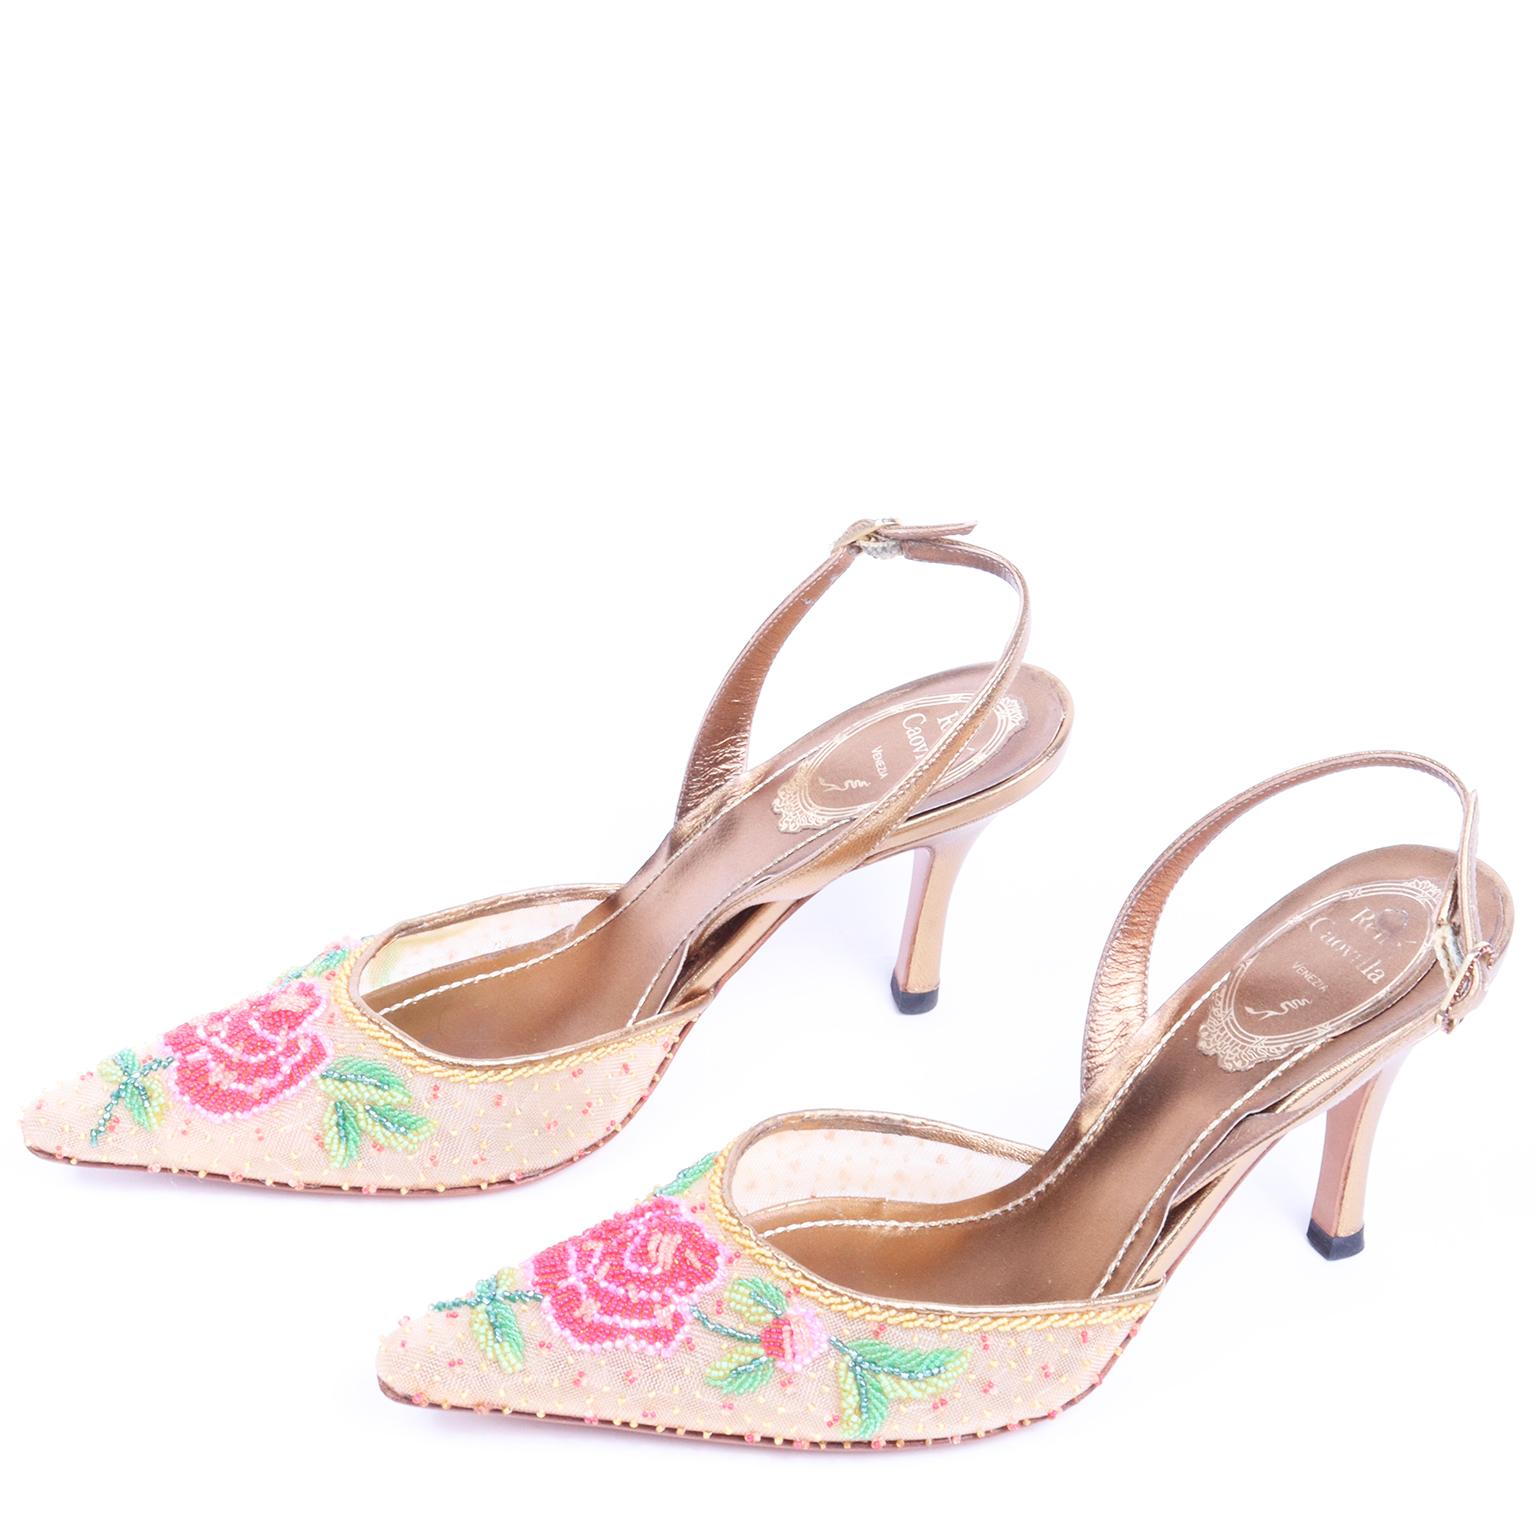 These are fabulous vintage Rene´ Caovilla slingback shoes with pointed toes and gold leather heels and straps. The upers are in a fine mesh with gold braid and gold leather trim and there are beautifully beaded red and pink roses with green leaves.